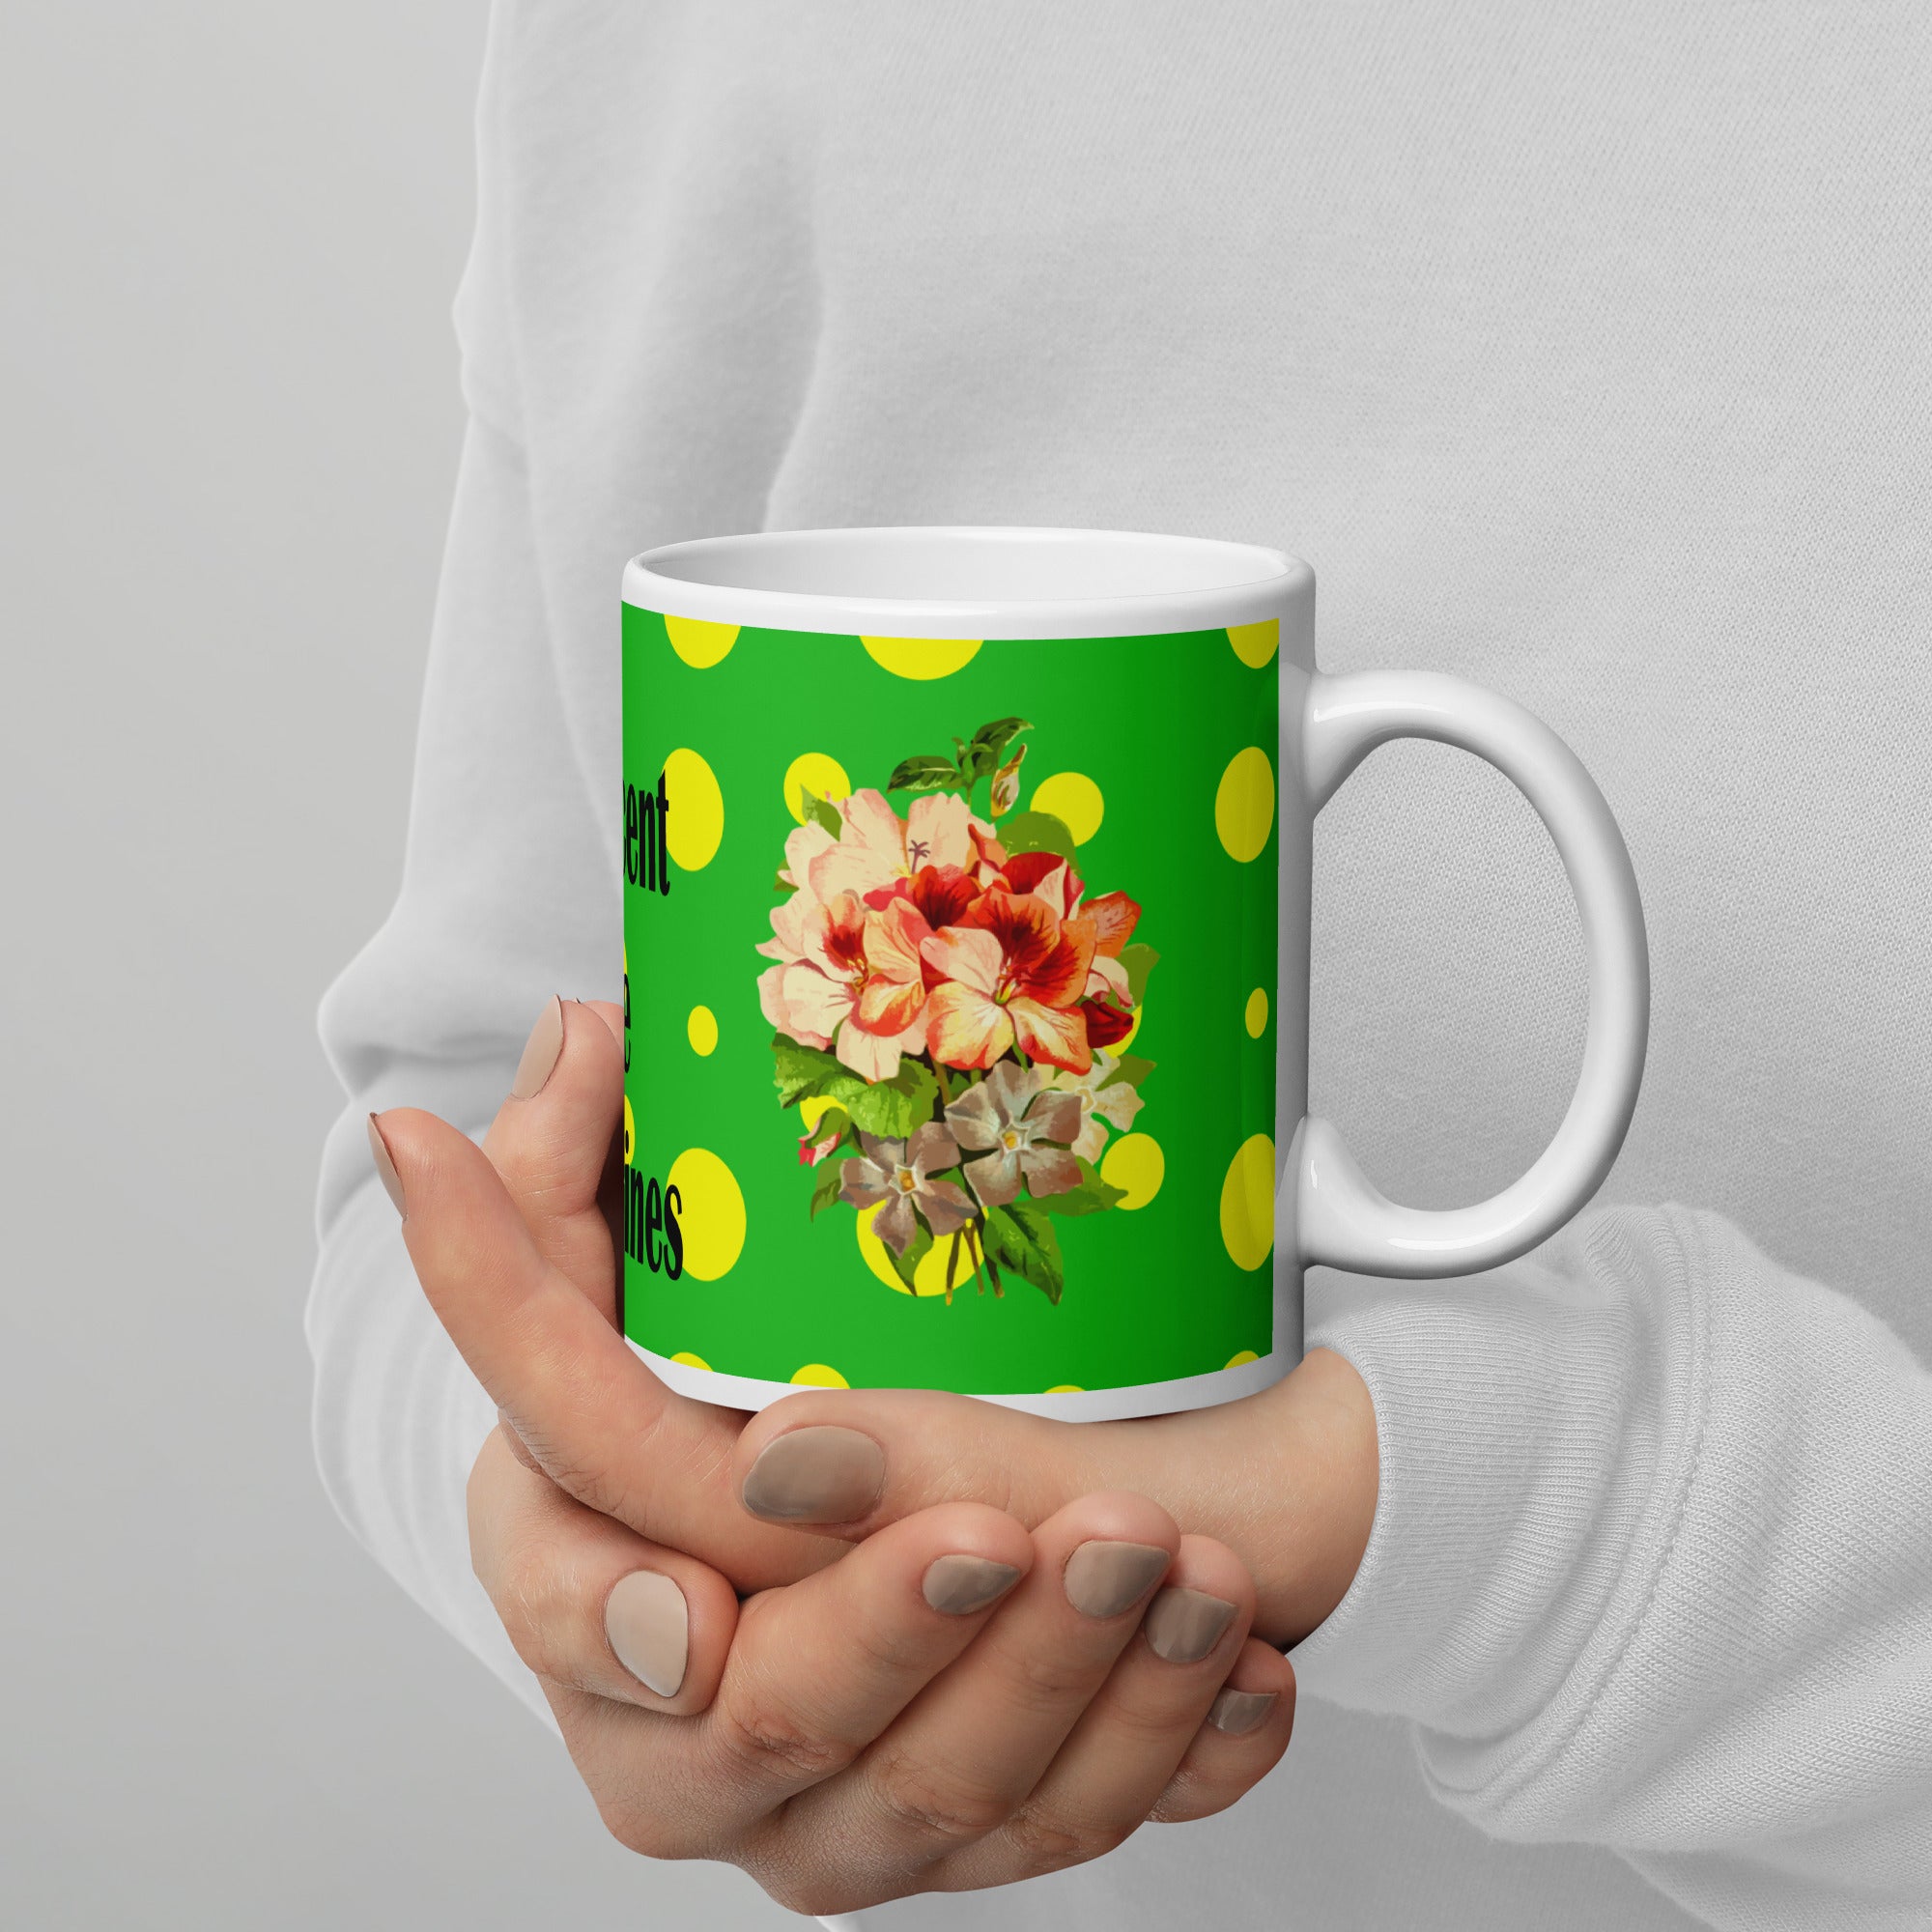 11oz St. Vincent and the Grenadines yellow spotted green floral souvenir ceramic mug